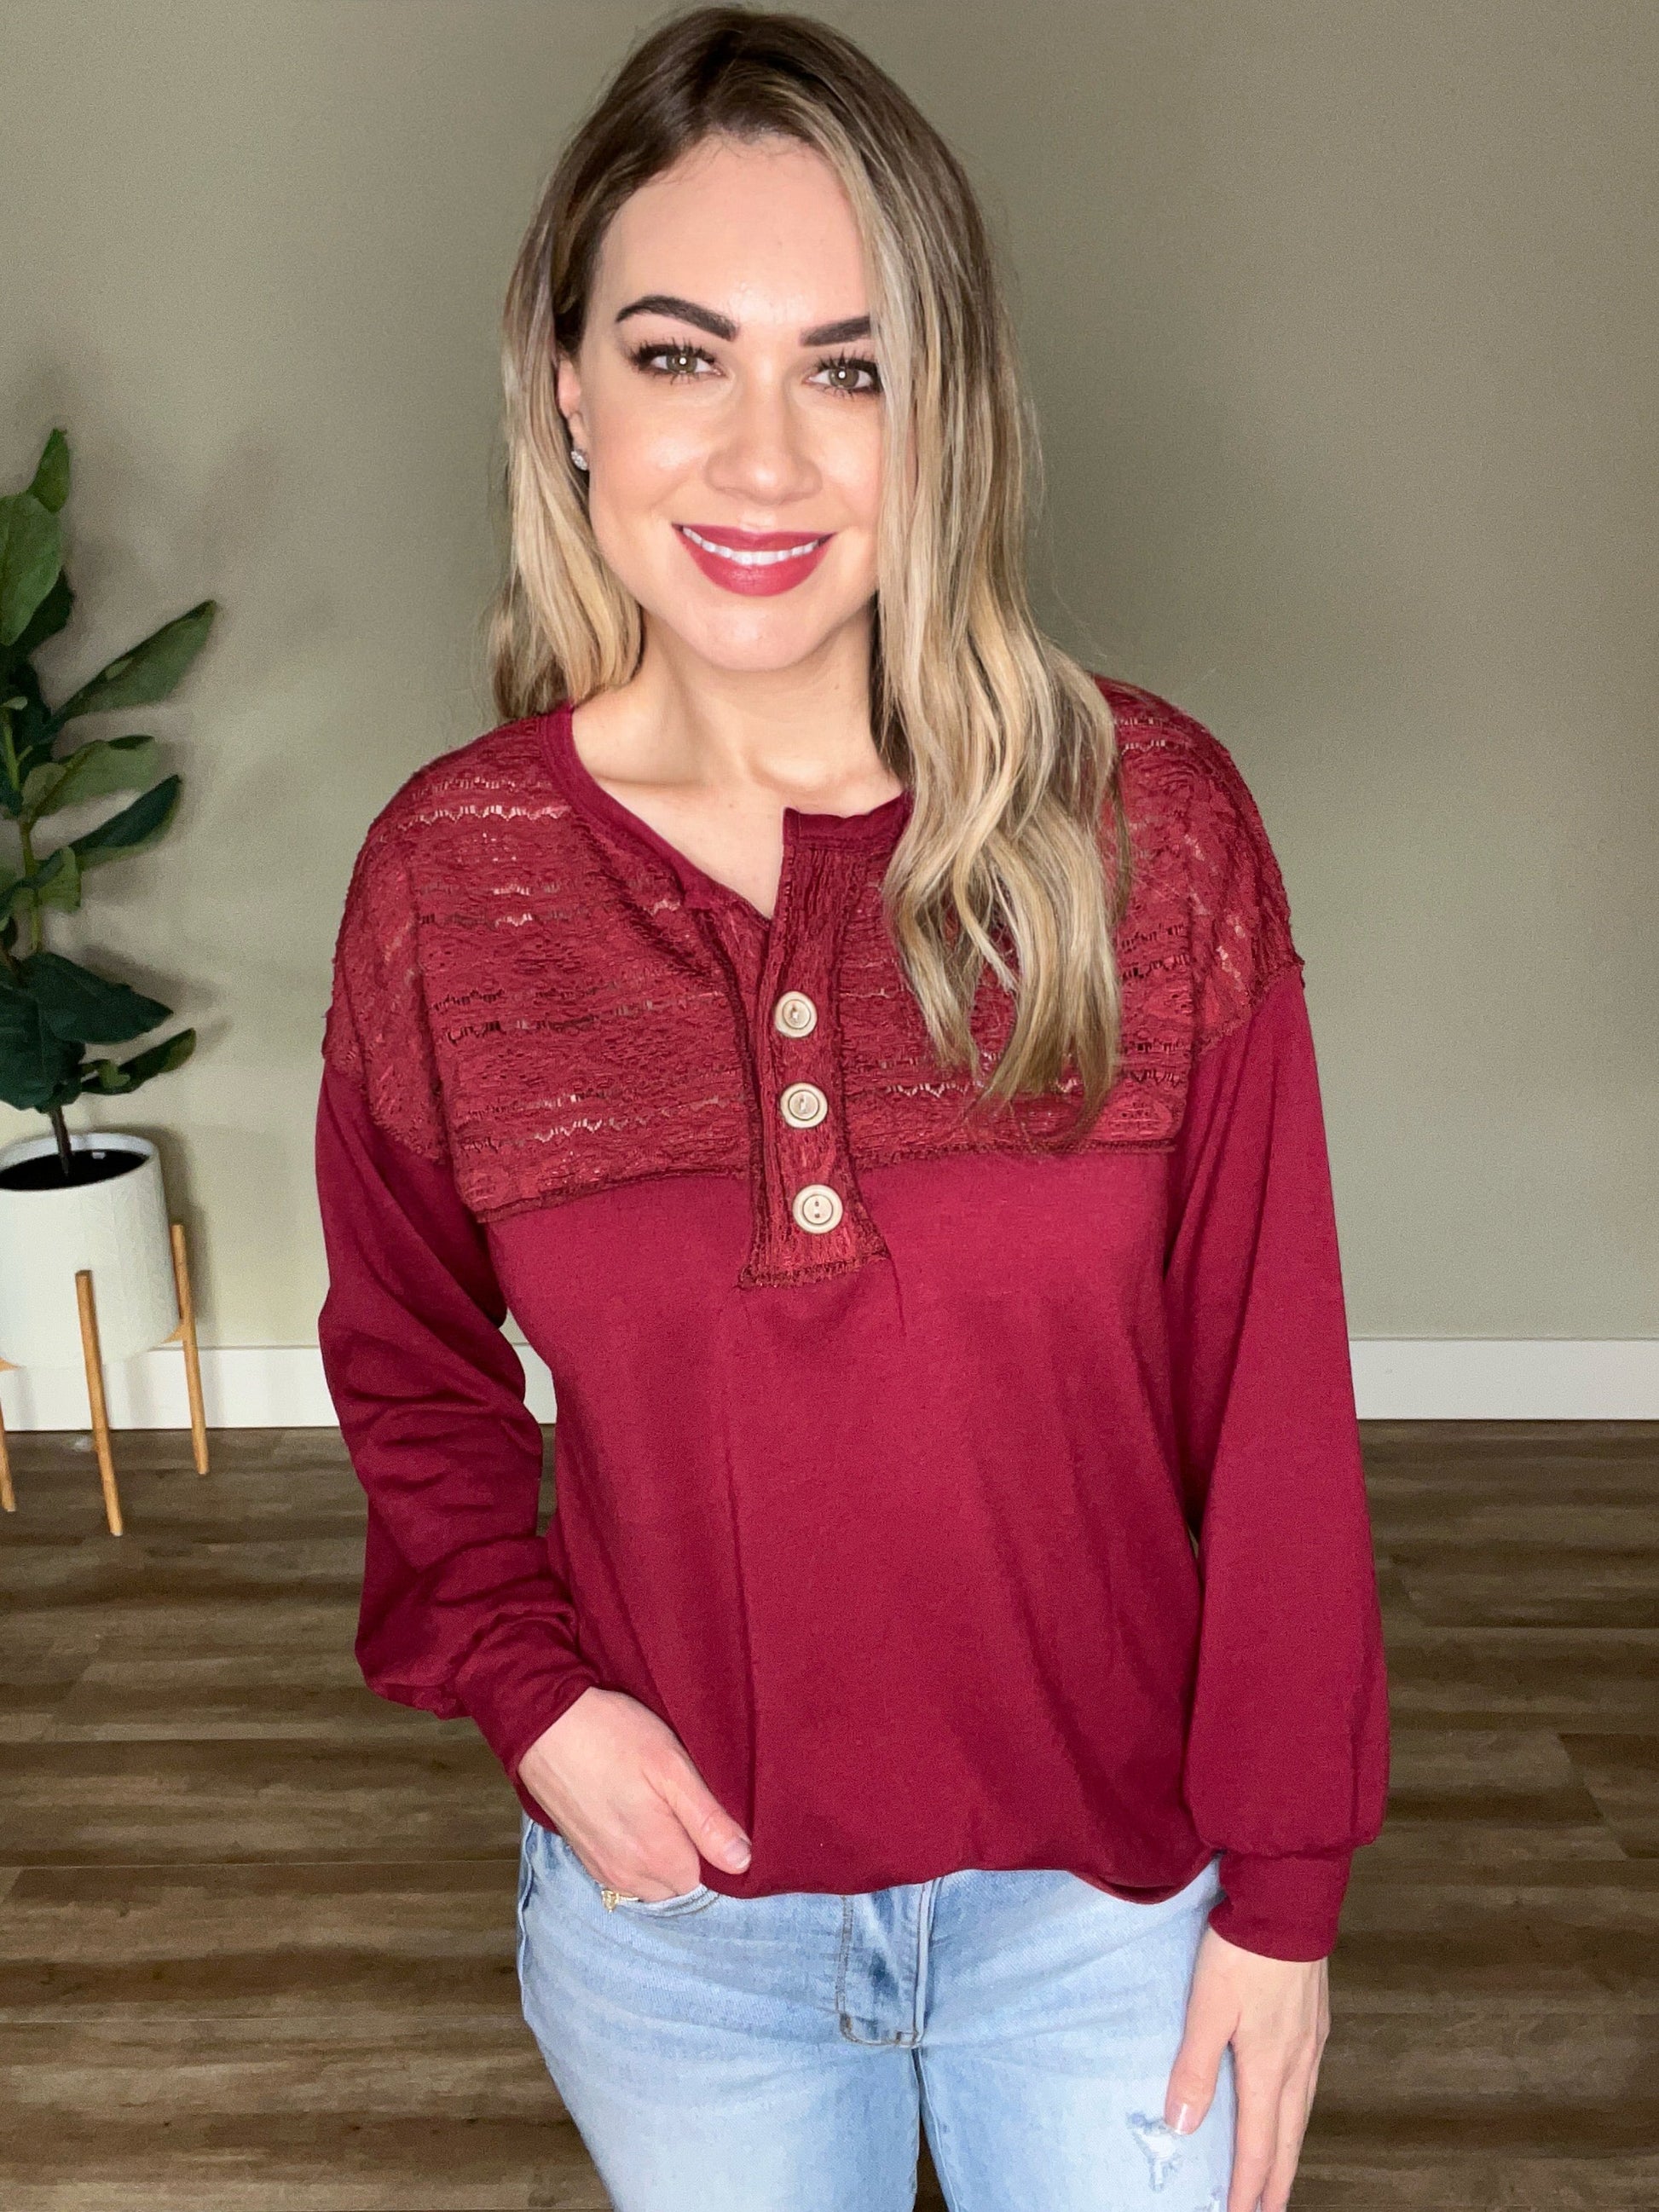 2.2 Henley Lace Front Top In Cherry American Boutique Drop Ship